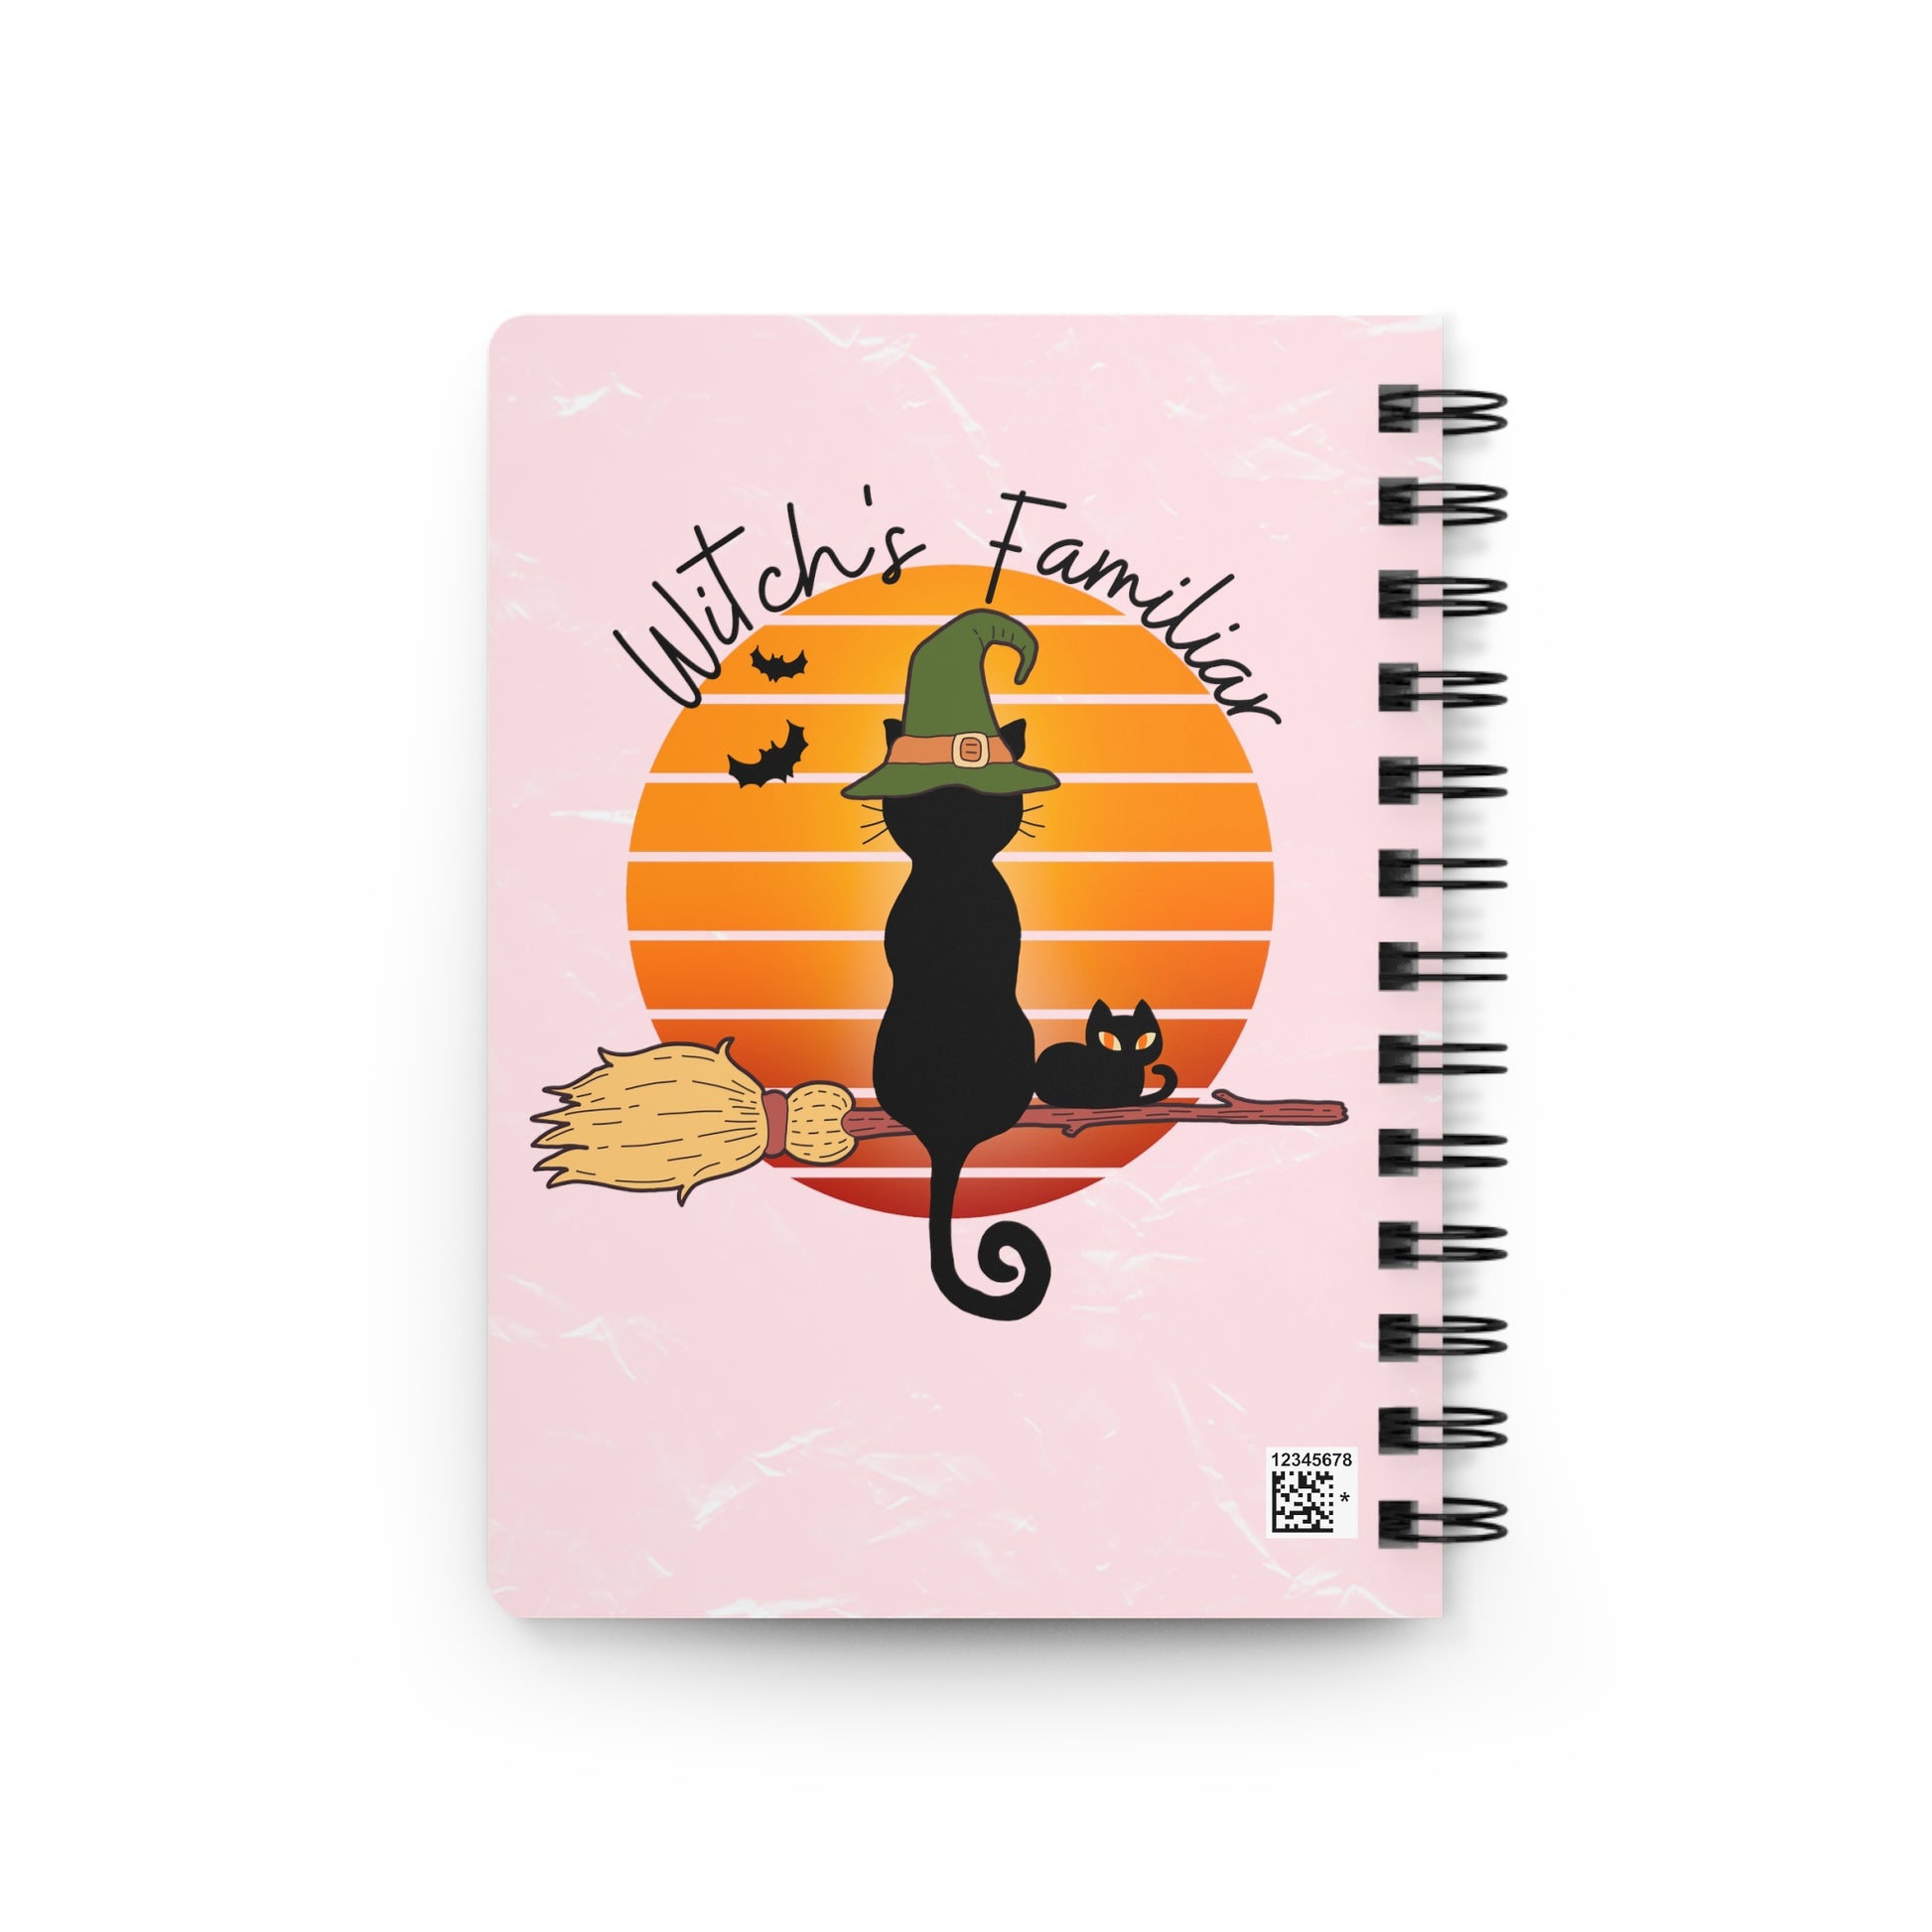 Witchy Cat Retro Vintage Sunset Spiral Bound Journal, Black Cat Familiar Notebook, Spooky Season Journal, Cute Mystical Magical Notebook